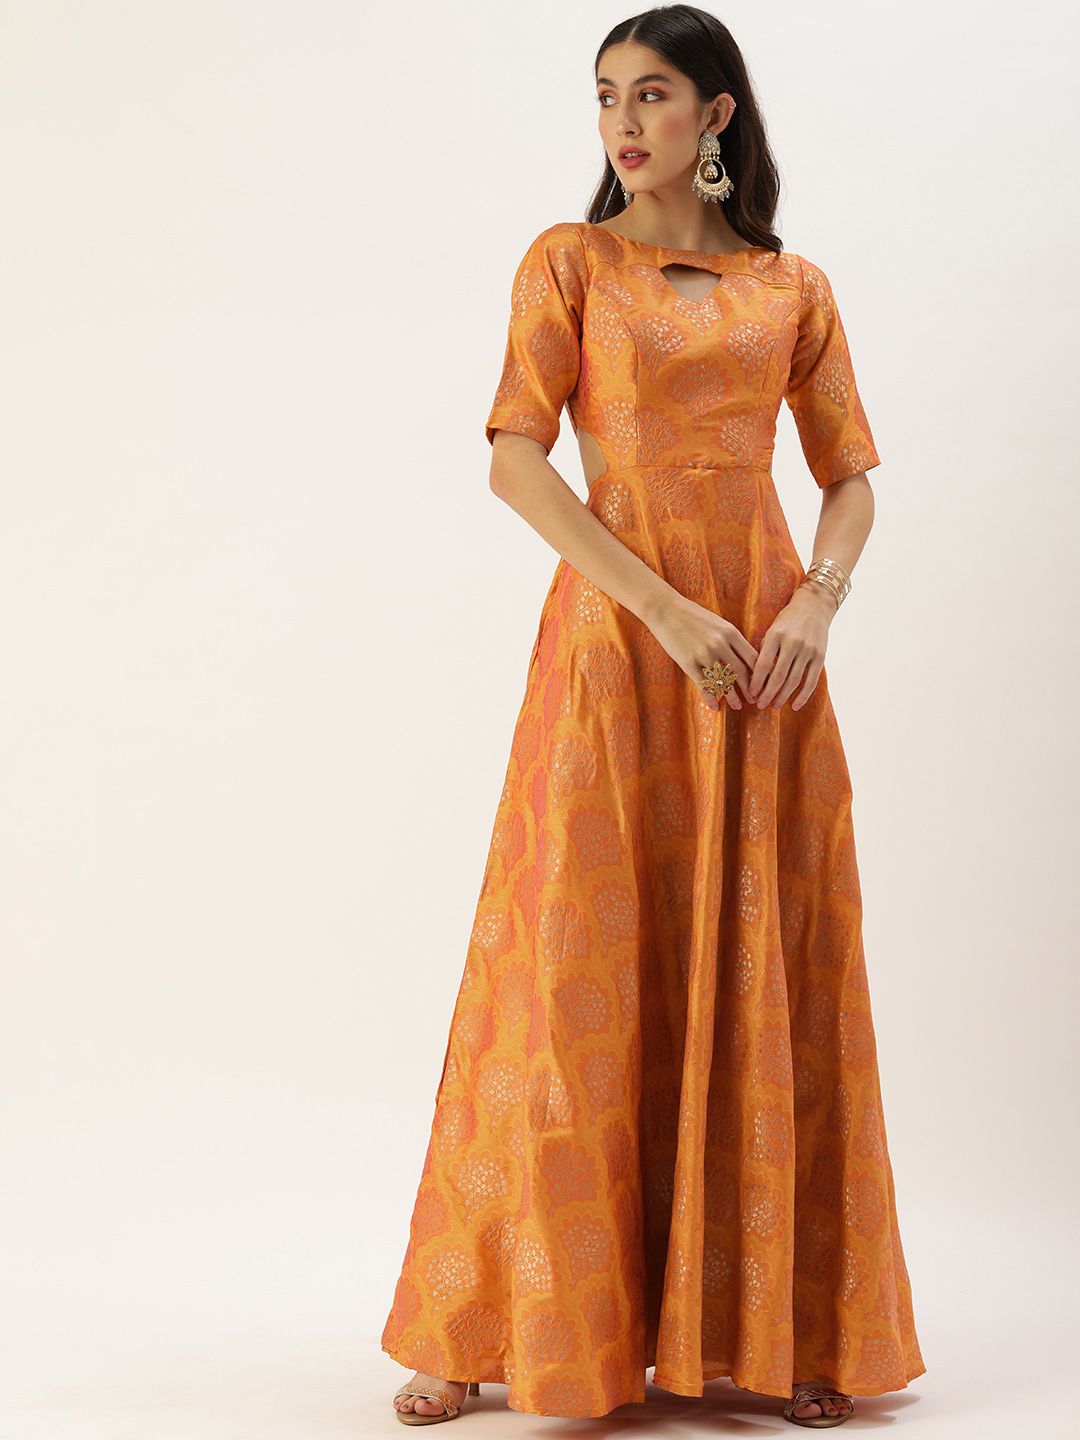 EthnoVogue Mustard Yellow Made To Measure Ethnic Motifs Woven Design A-Line Maxi Dress Price in India